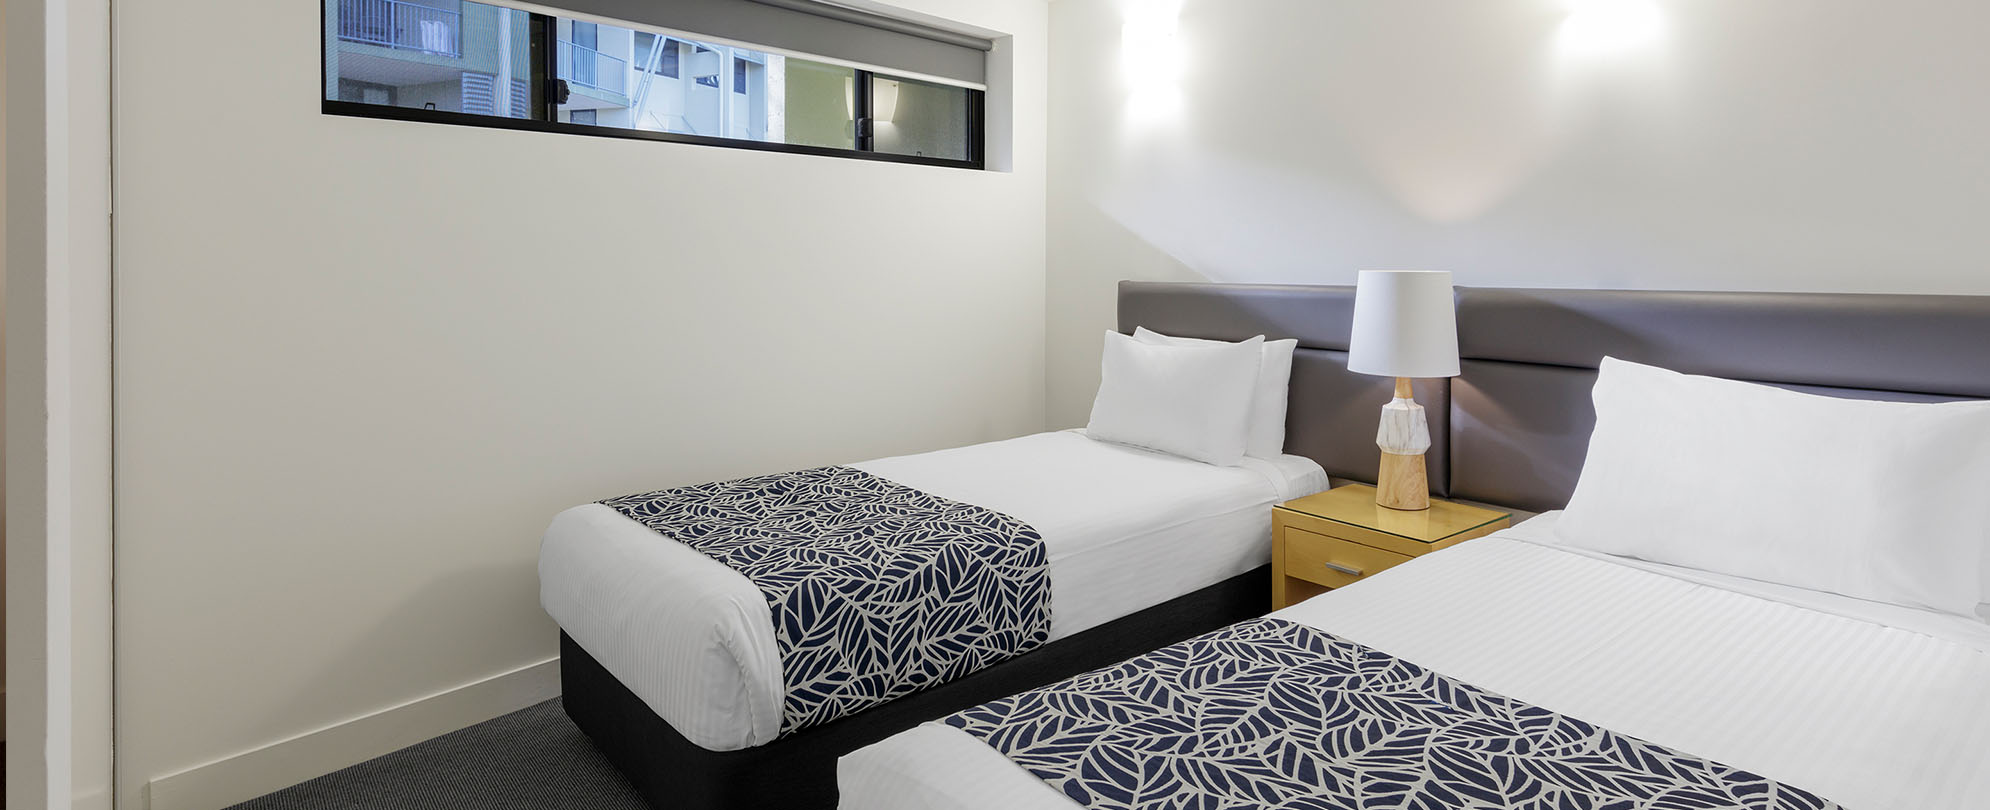 Two twin sized beds in one of the bedrooms of a 2-bedroom suite at Club Wyndham Coffs Harbor.